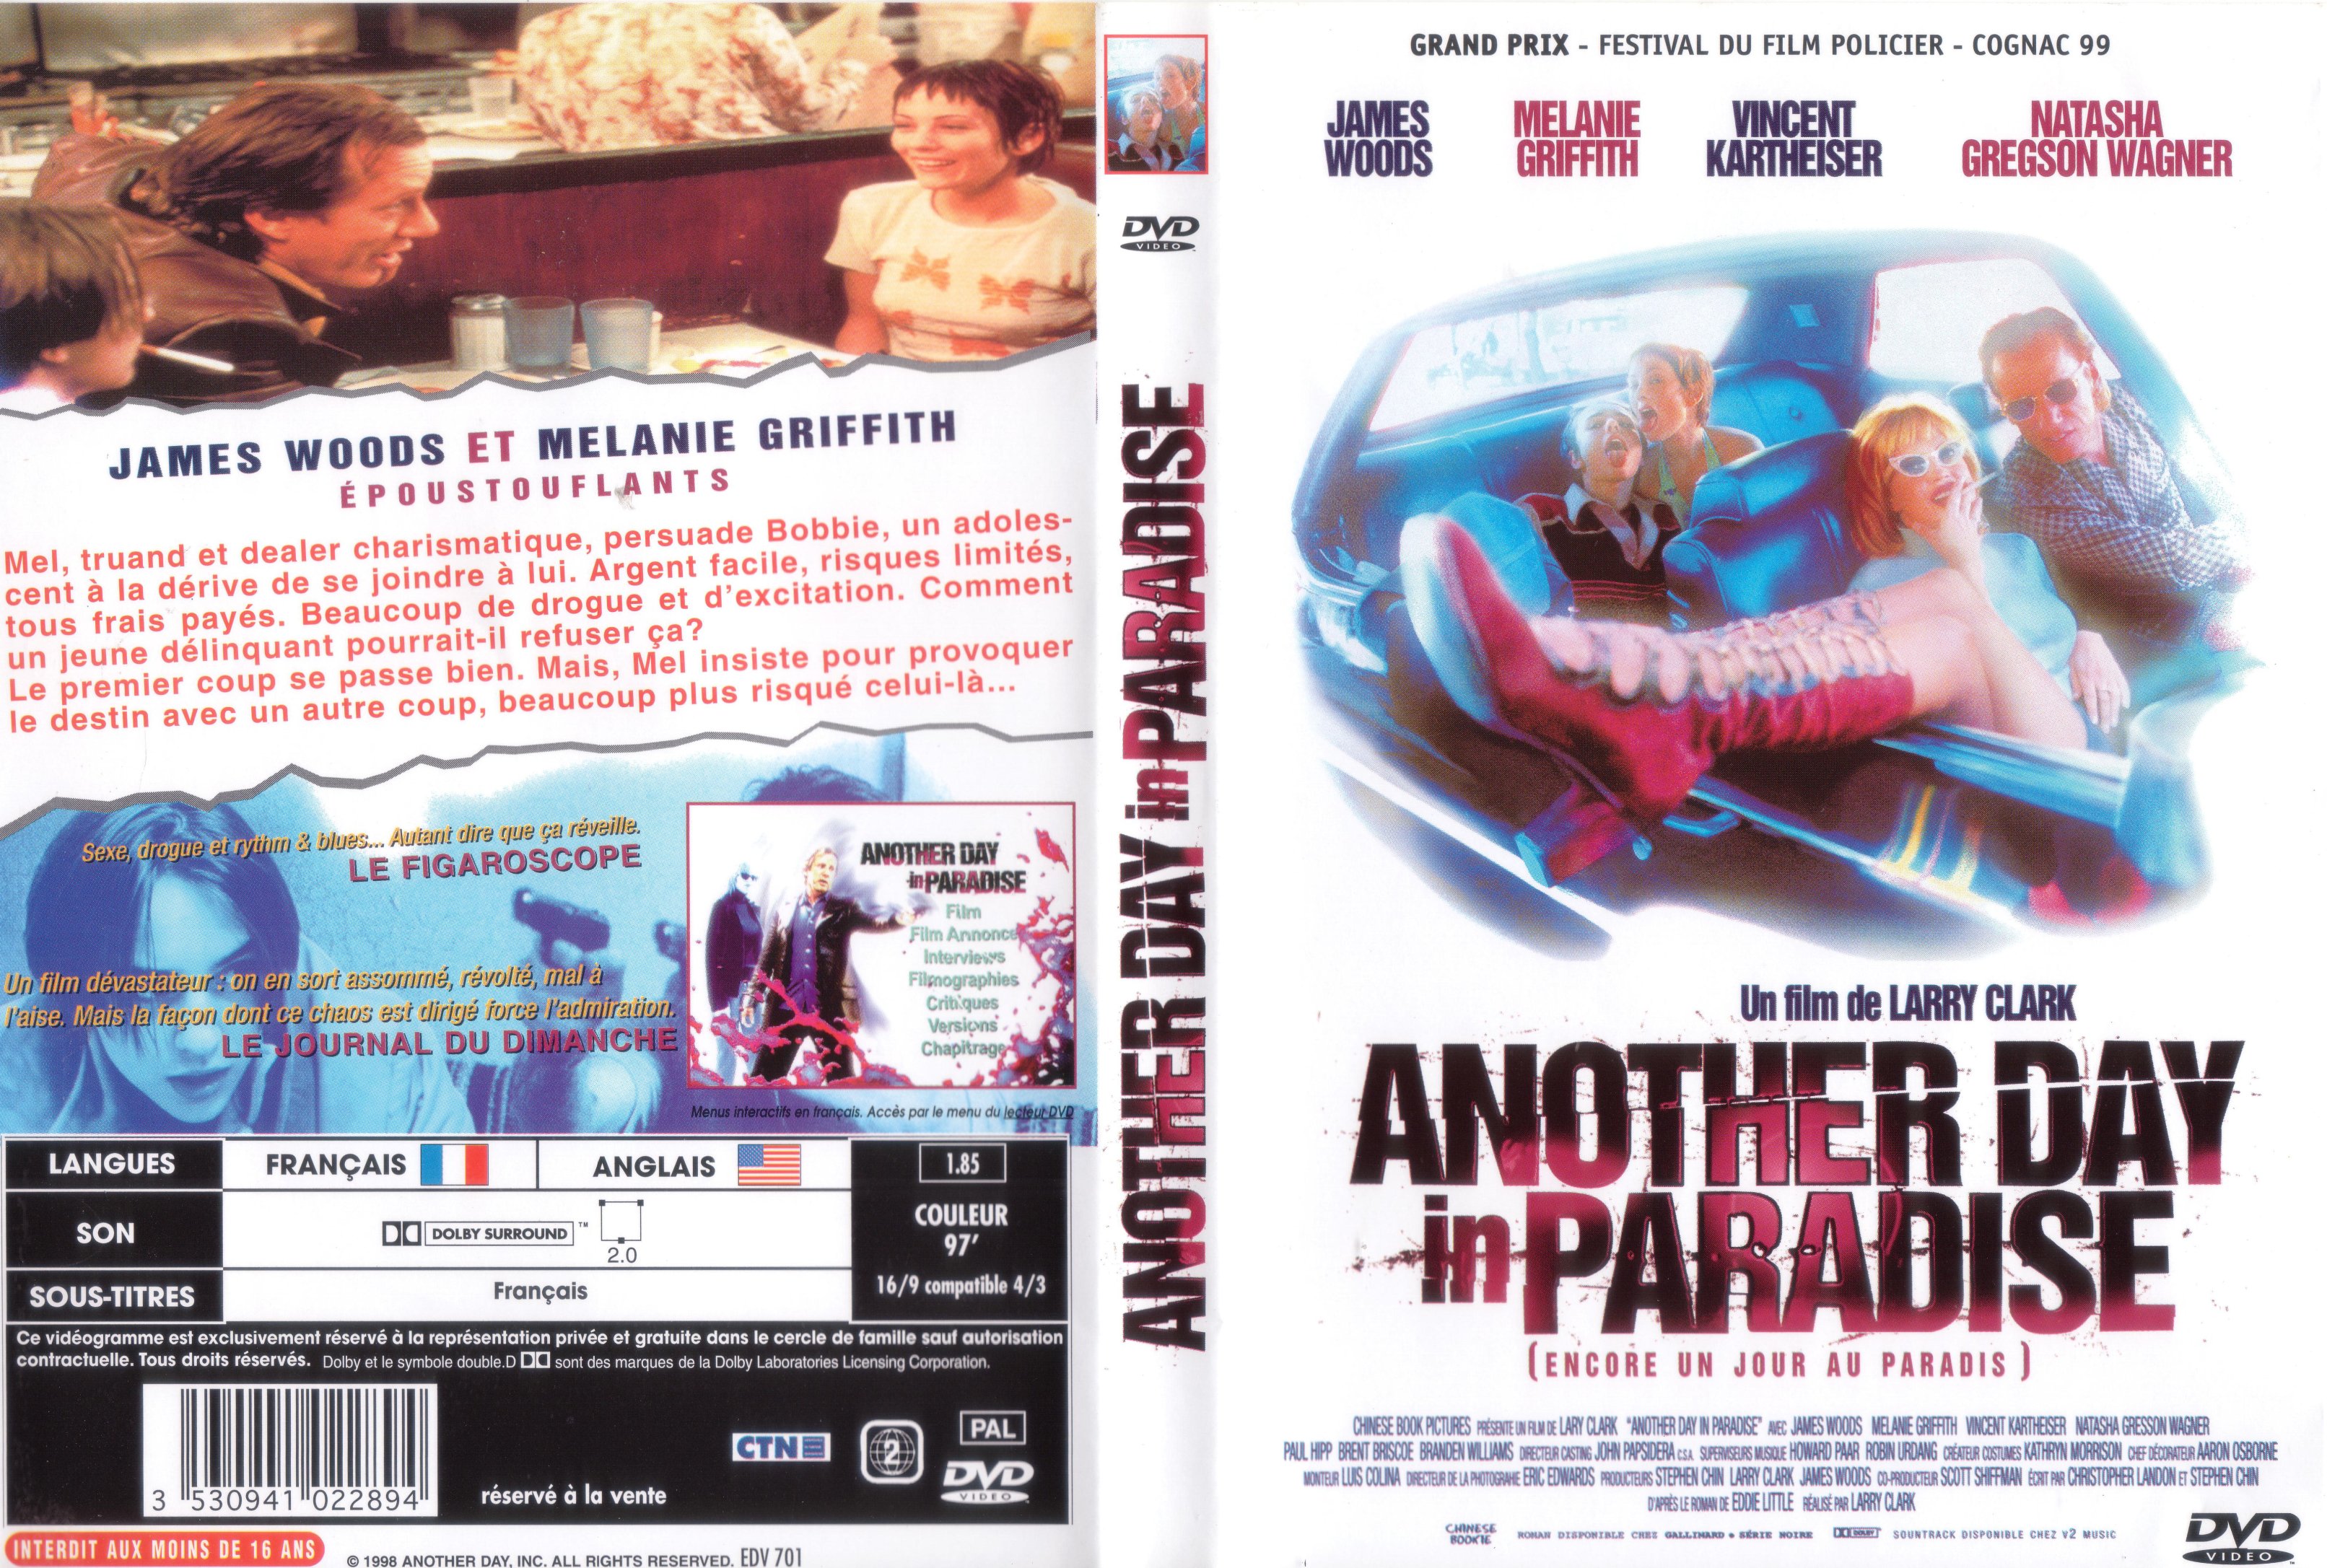 Jaquette DVD Another day in paradise